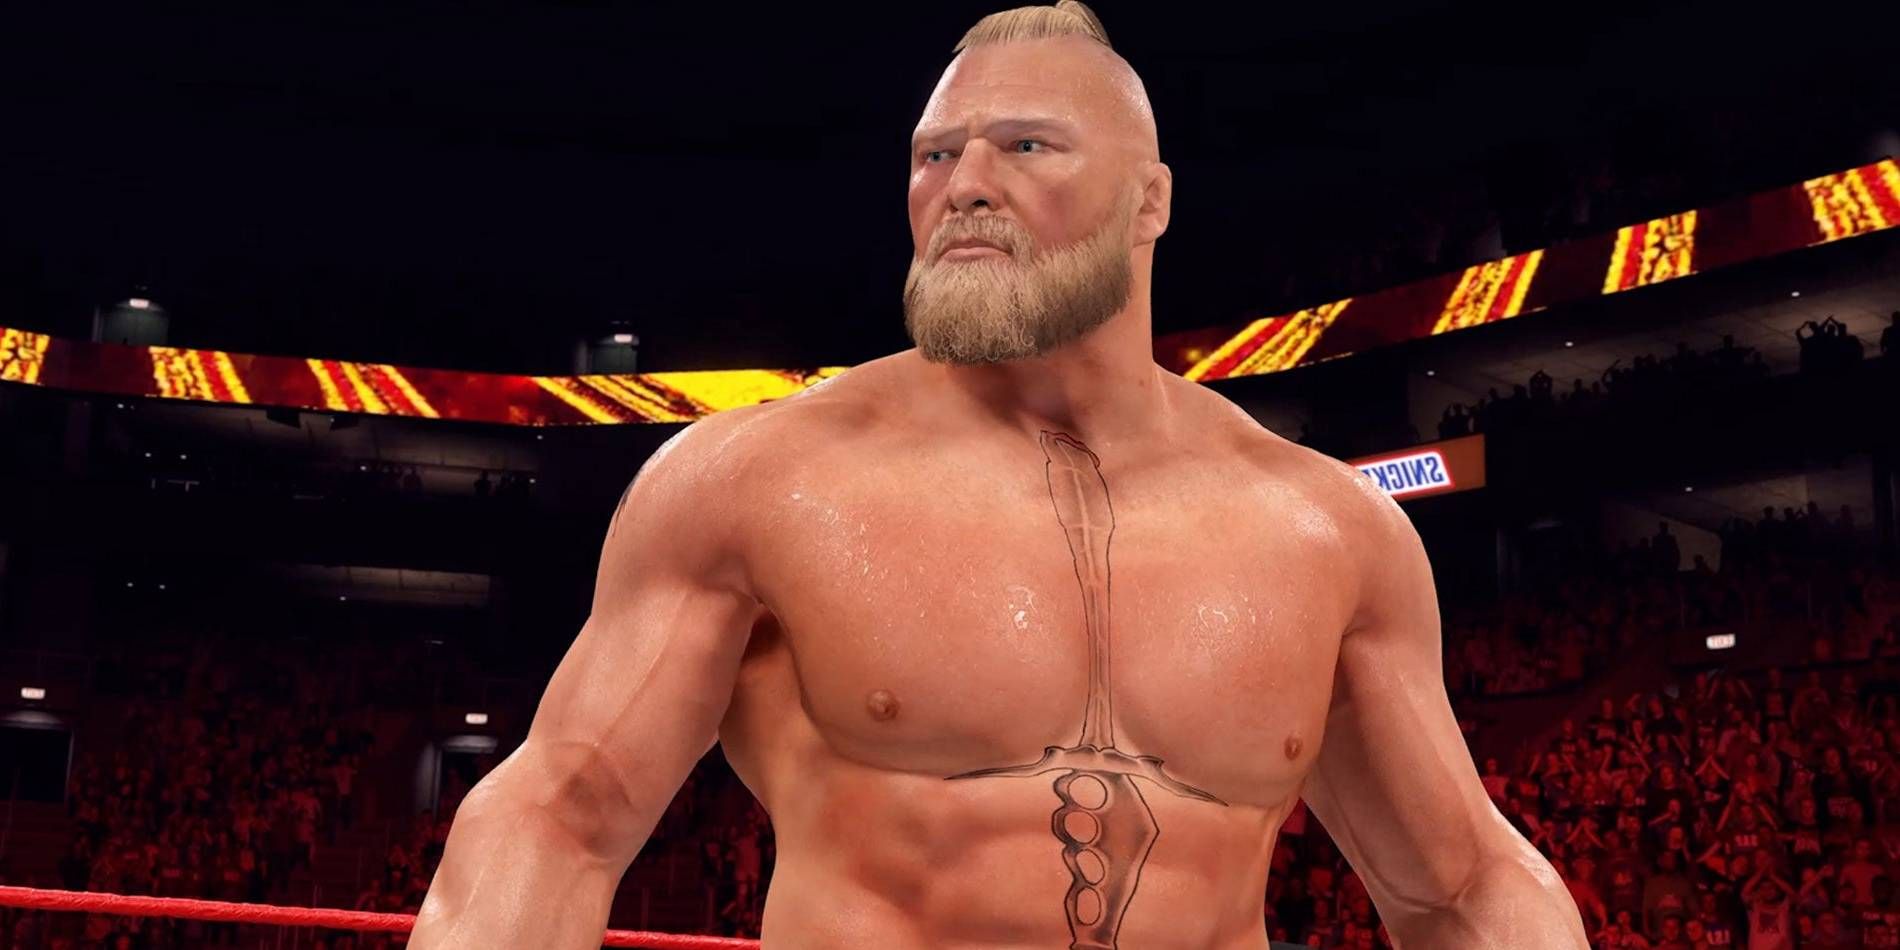 WWE 2K22 Brock Lesnar with a Beard Ready to Wrestle Against Opponents in One of Several Game Modes